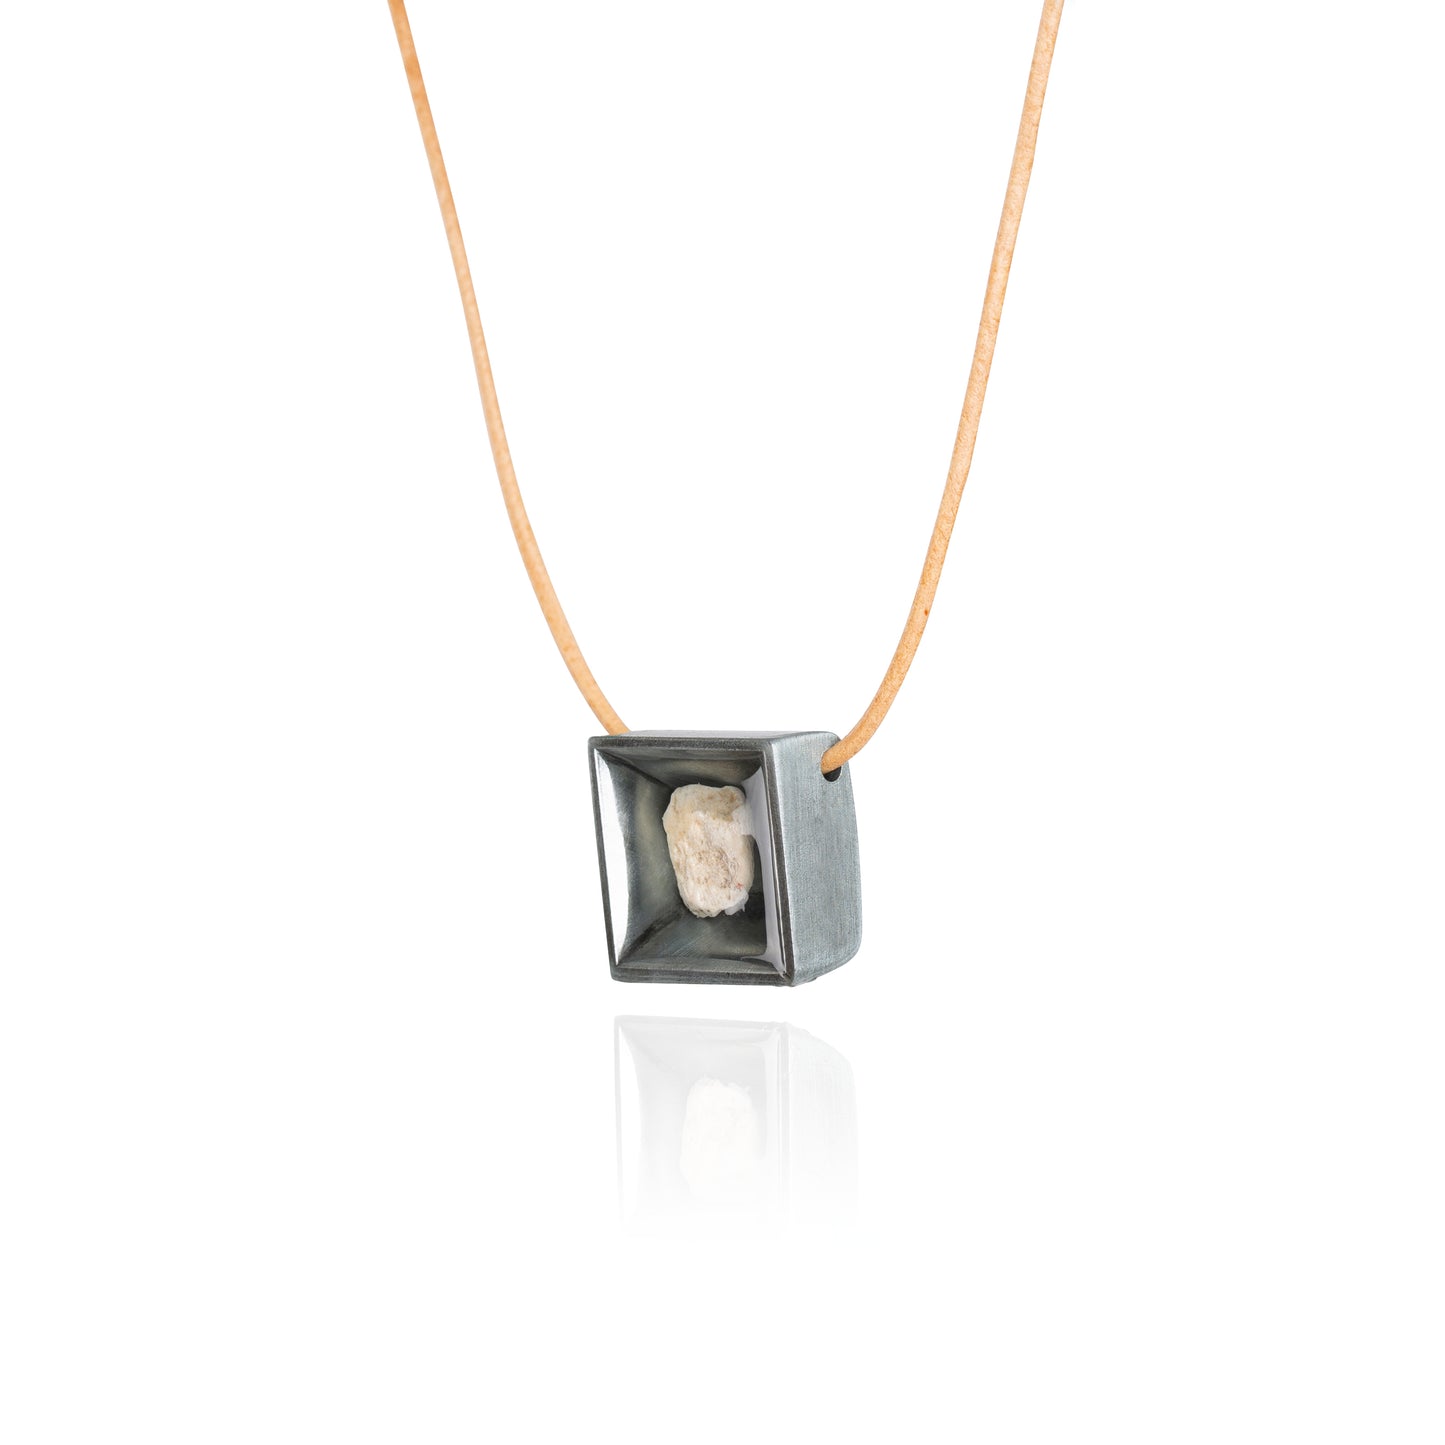 A side view of a small natural tan stone sitting in the middle of a square shaped metal pendant in a dark silver color. The pendant is hanging on a tan leather necklace.